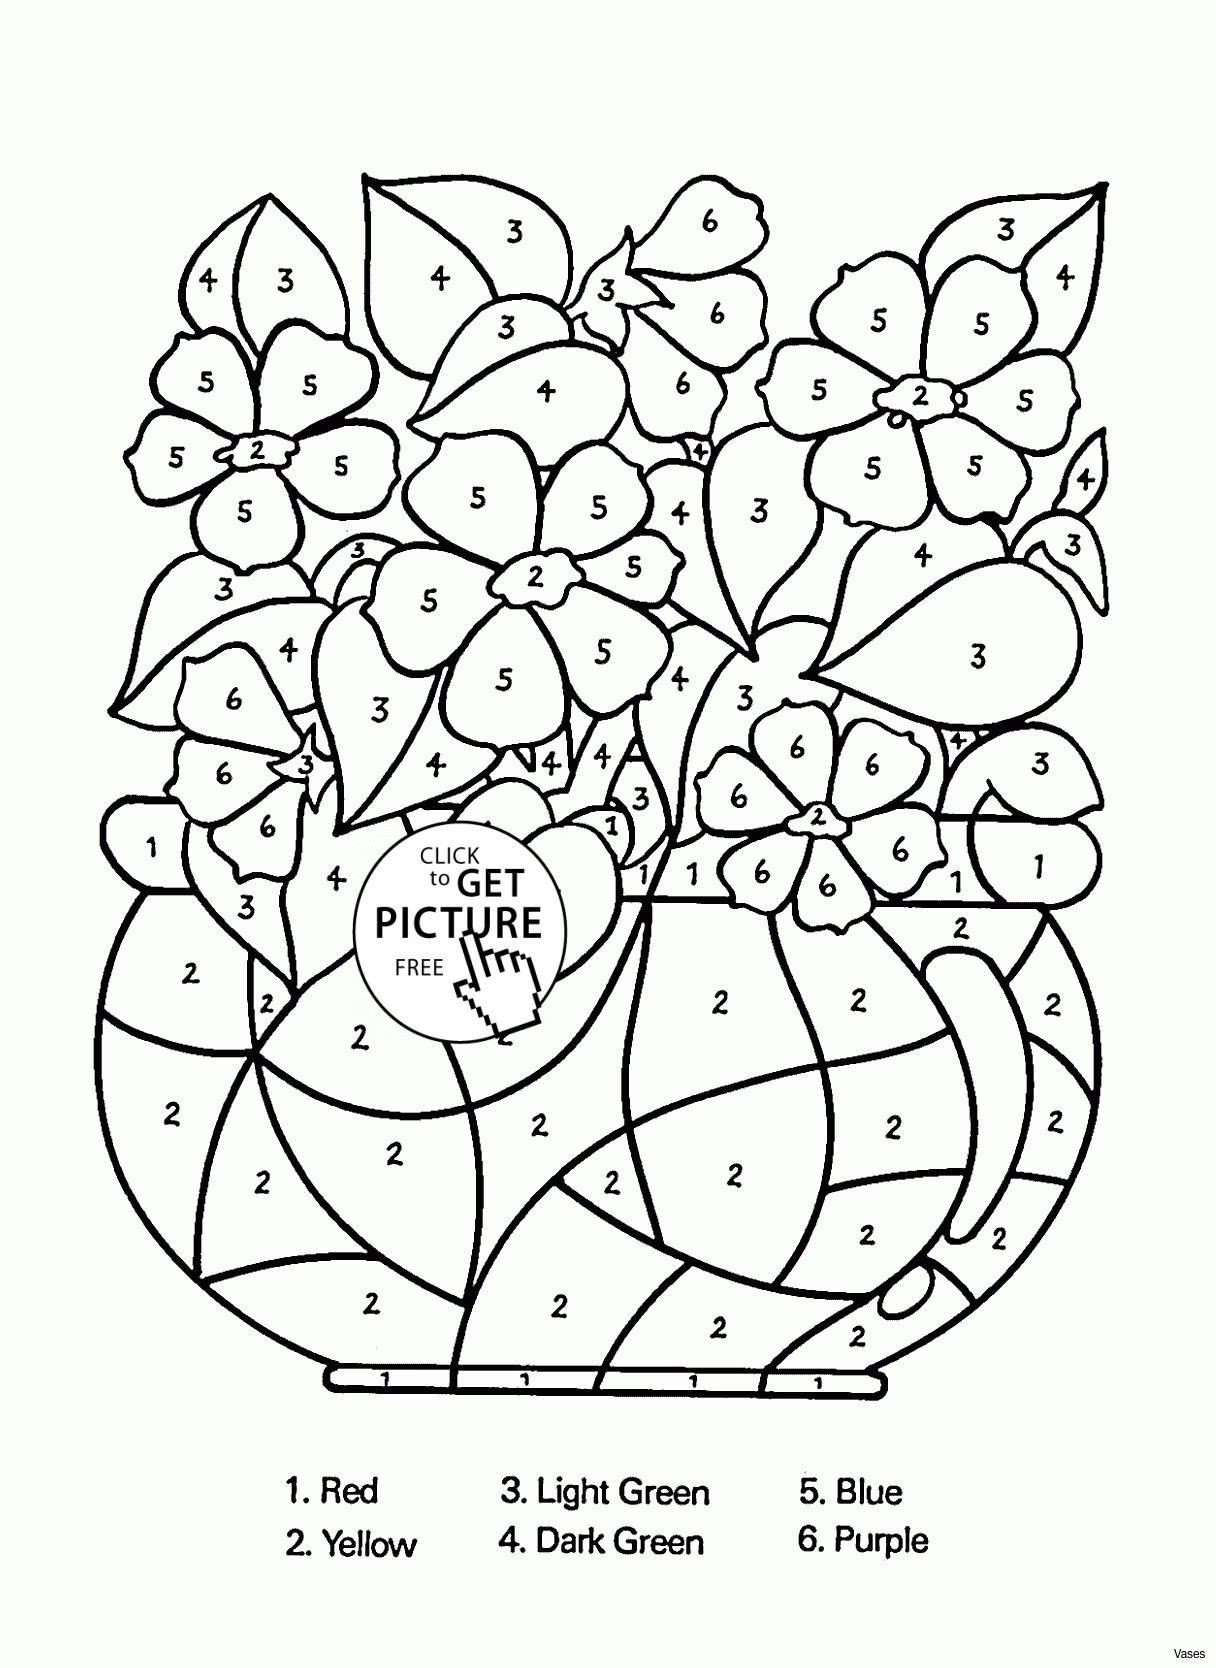 Small Green Vase Of Dark Green Pillows New Cool Vases Flower Vase Coloring Page Pages for Dark Green Pillows New Cool Vases Flower Vase Coloring Page Pages Flowers In A top I